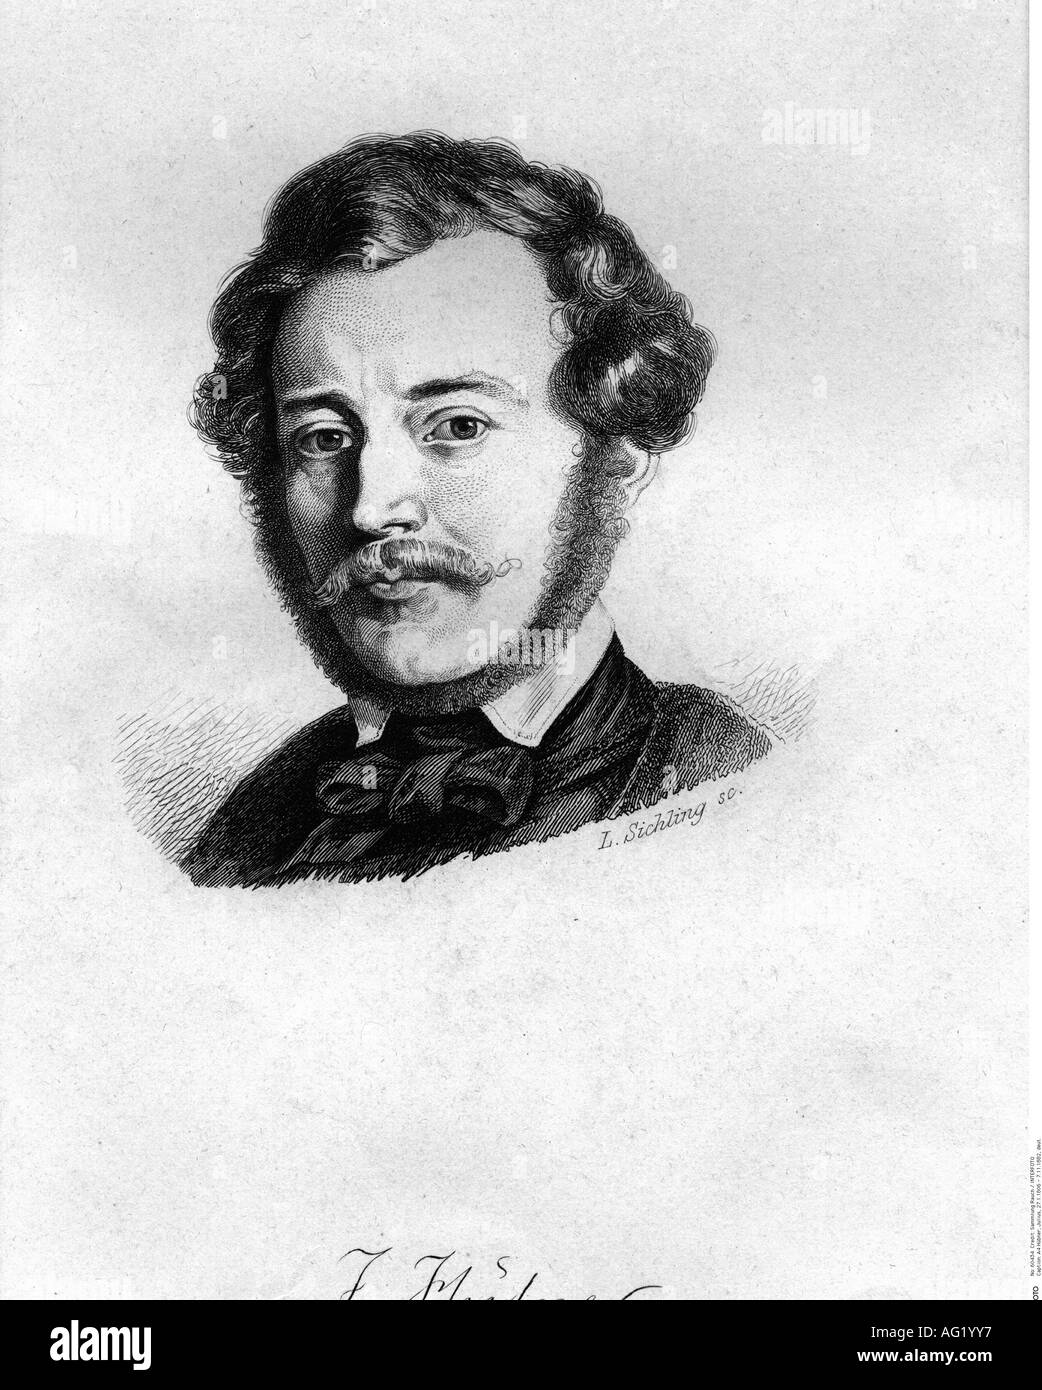 Hübner, Julius, 27.1.1806 - 7.11.1882, German painter, portrait, engraving by Lazarus Sichling (1812 - 1863),  19th century, Hubner, Huebner, , Artist's Copyright has not to be cleared Stock Photo